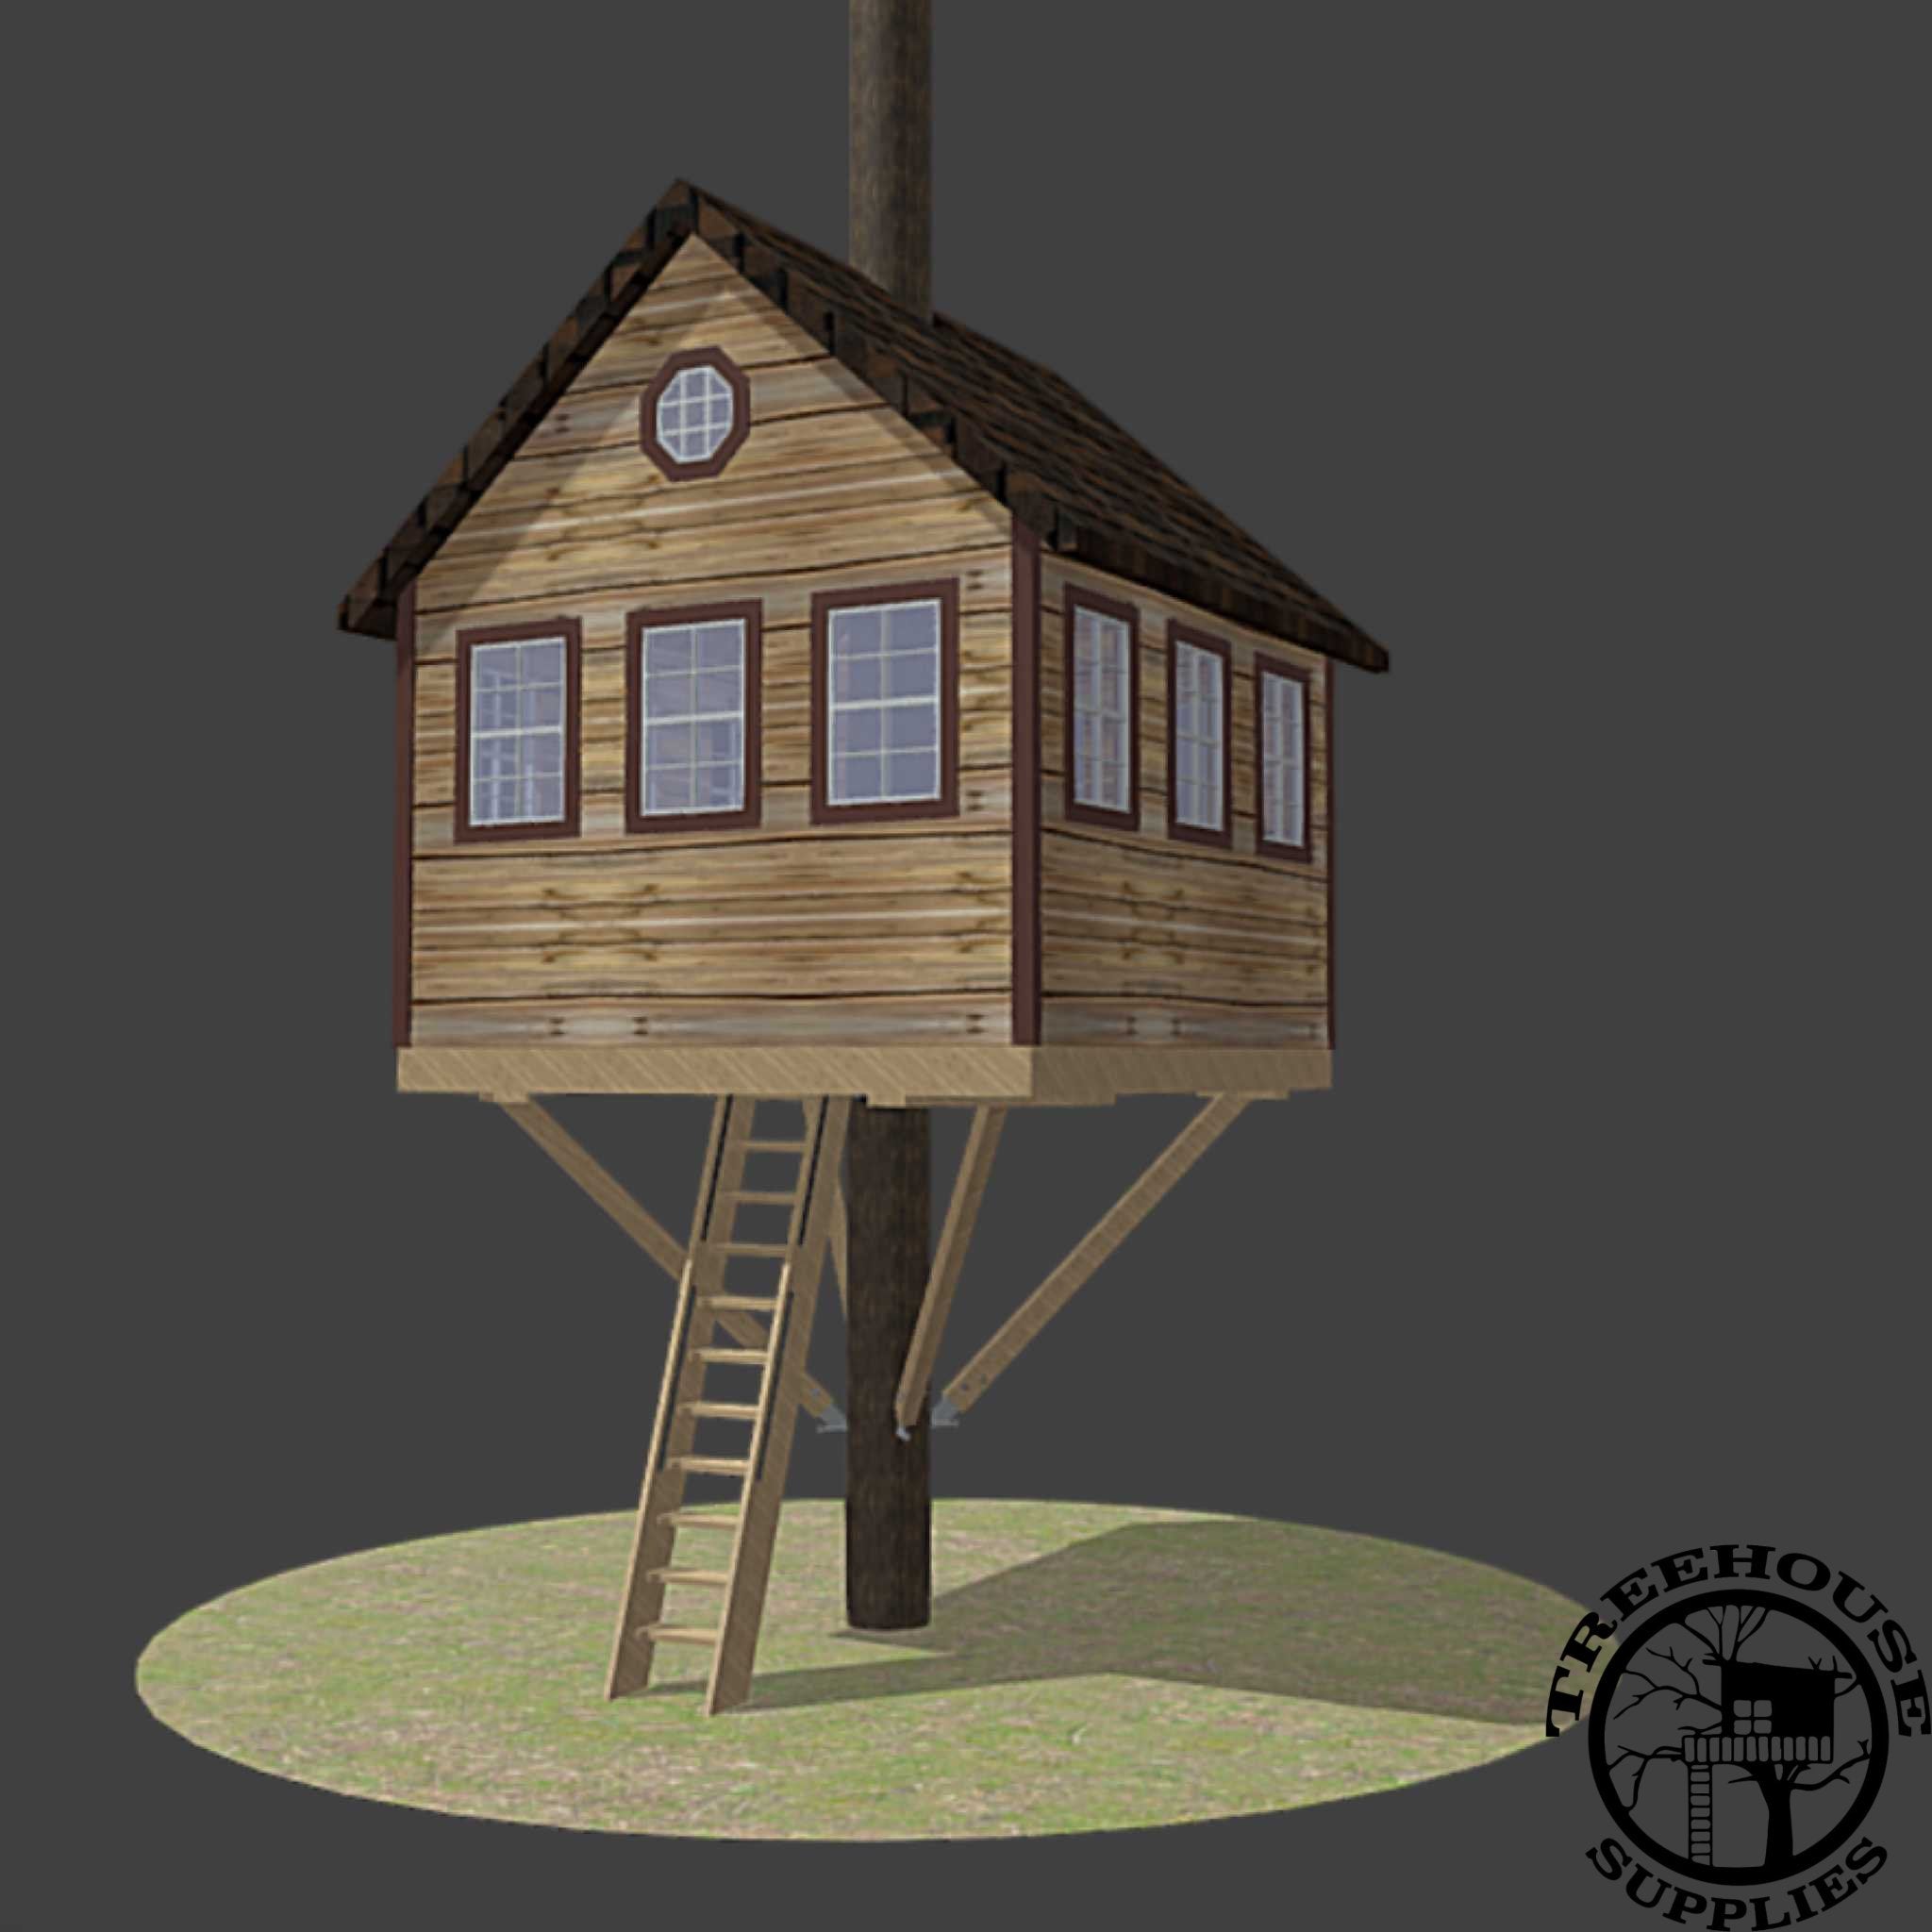 12' SQUARE TREEHOUSE PLAN - NOW INCLUDES STEP-BY-STEP 3D MODELING!! - Treehouse Supplies